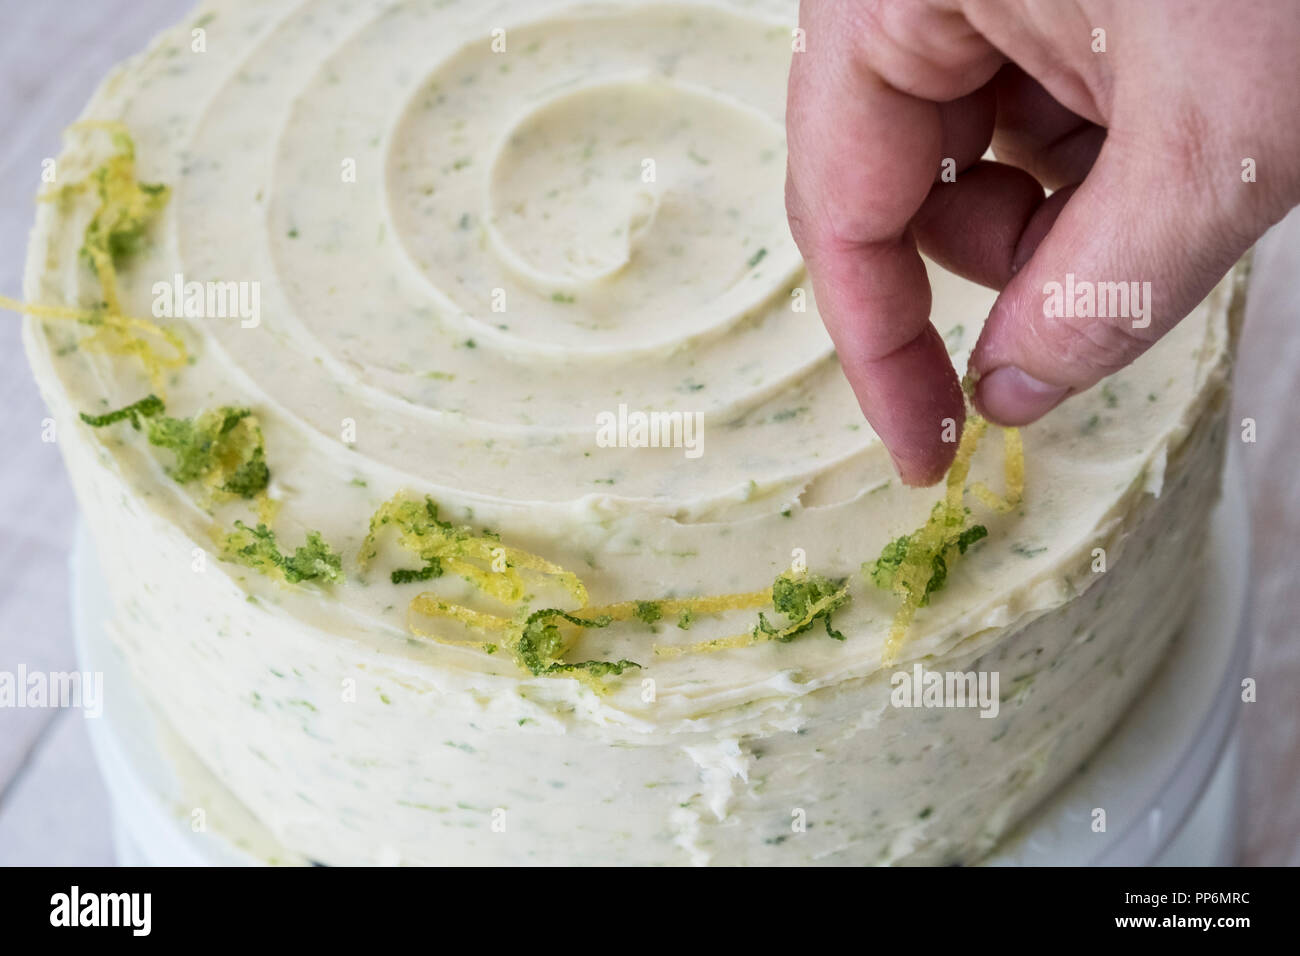 High angle view of a person decorating a gin and tonic cake white icing and with green grated lime zest. Stock Photo